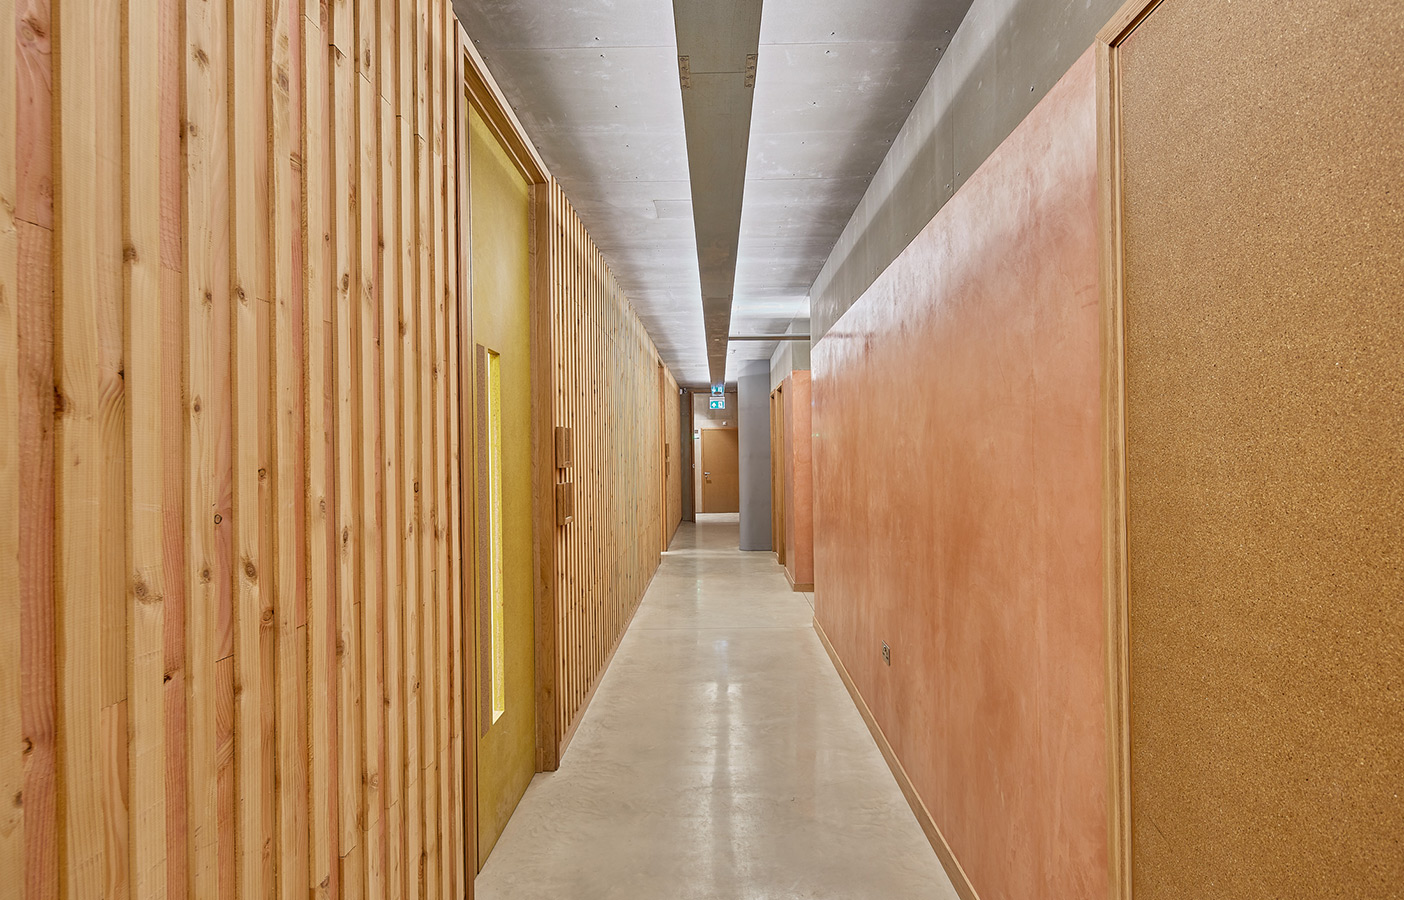 Aldworth James & Bond | triyoga Shoreditch Studio | Hallway with exposed plaster and timber panelling